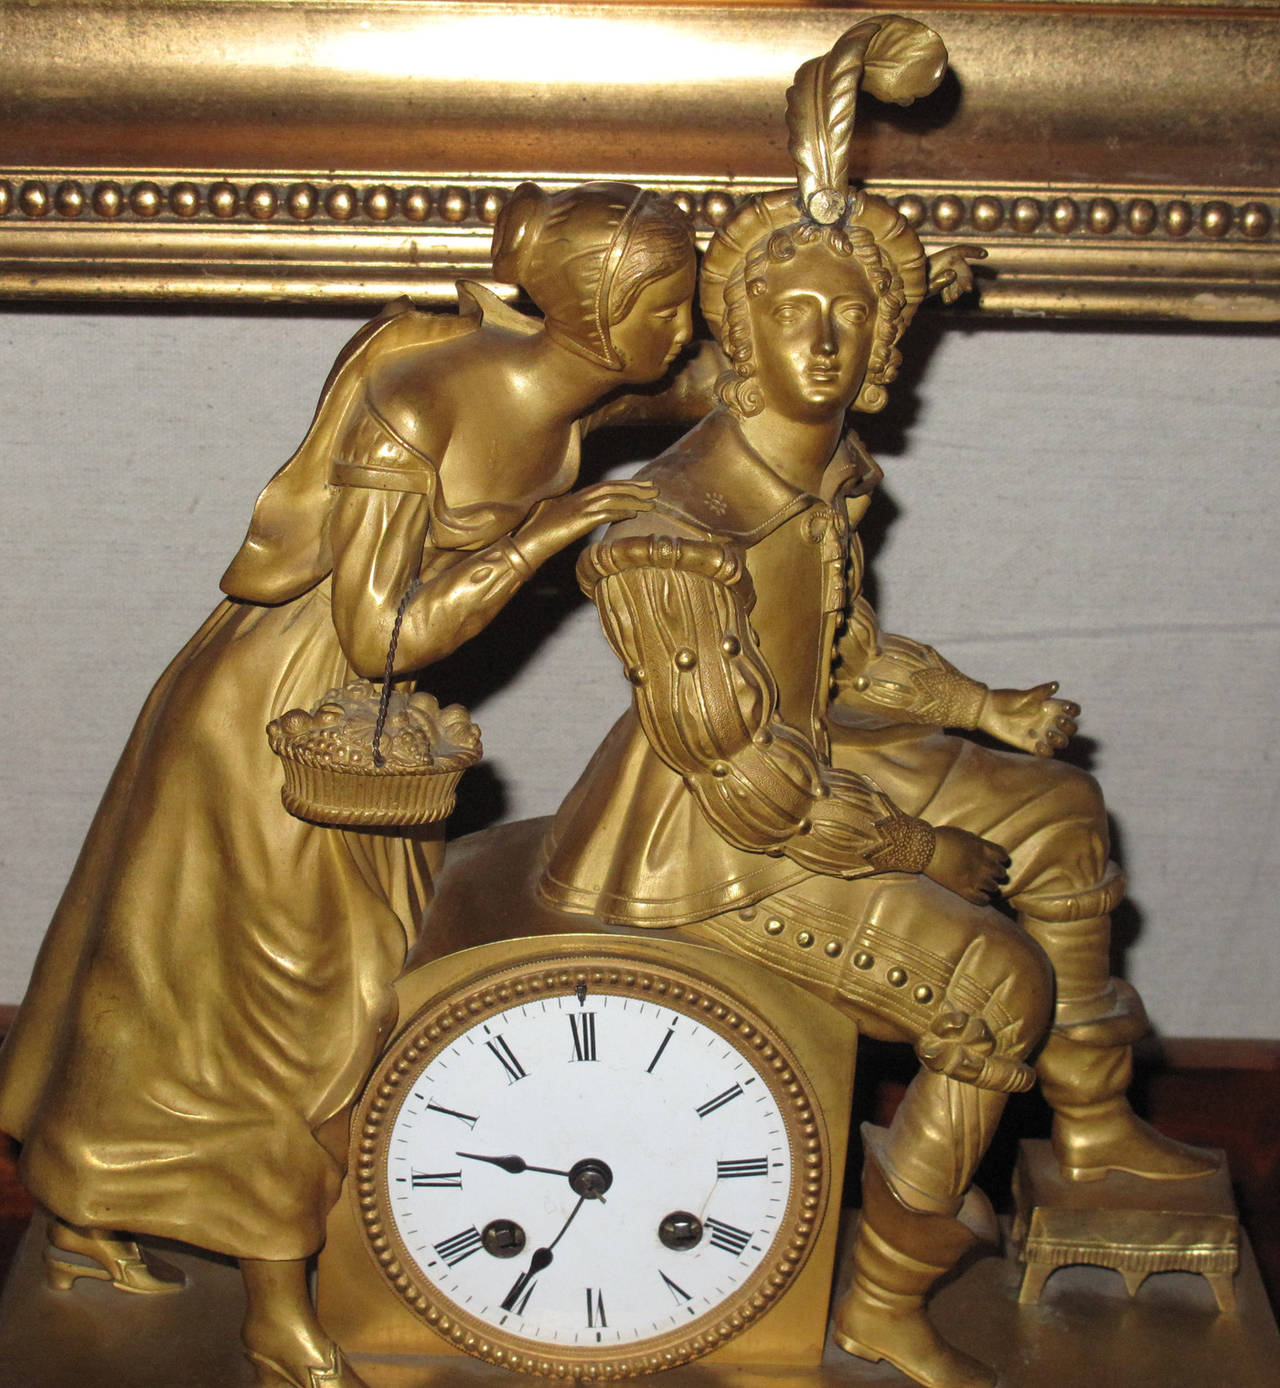 French Empire ormolu mantel clock with a female and male figure in fancy dress sculpted in the round.  The base cast with neo-classical ornamentation. 
Circa 1815-20